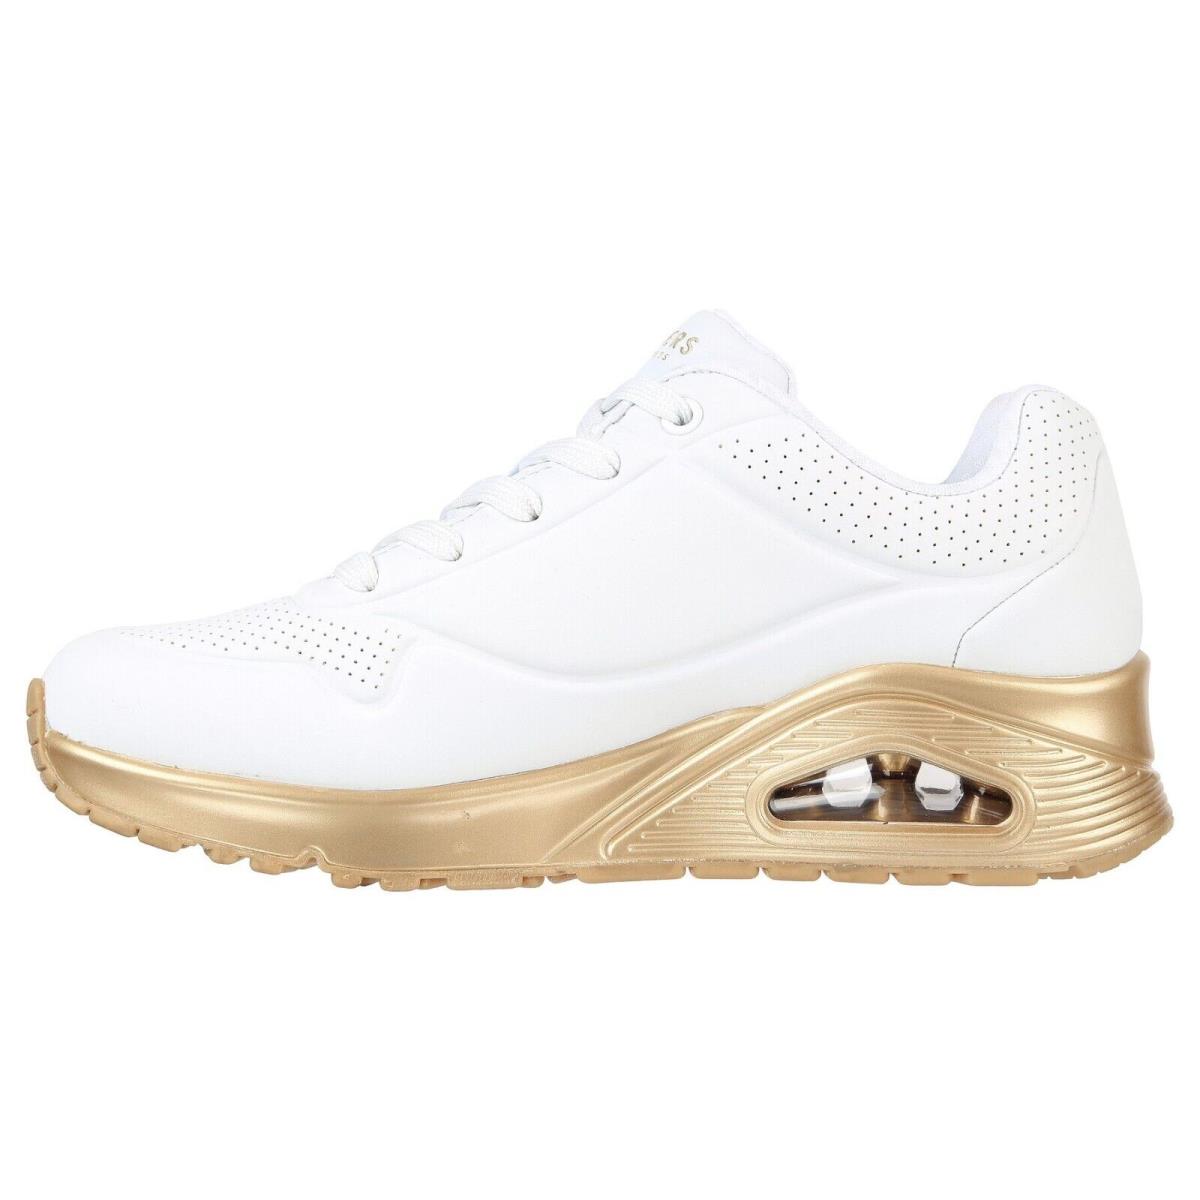 Skechers shoes Uno Gold Soul - White/Gold 9